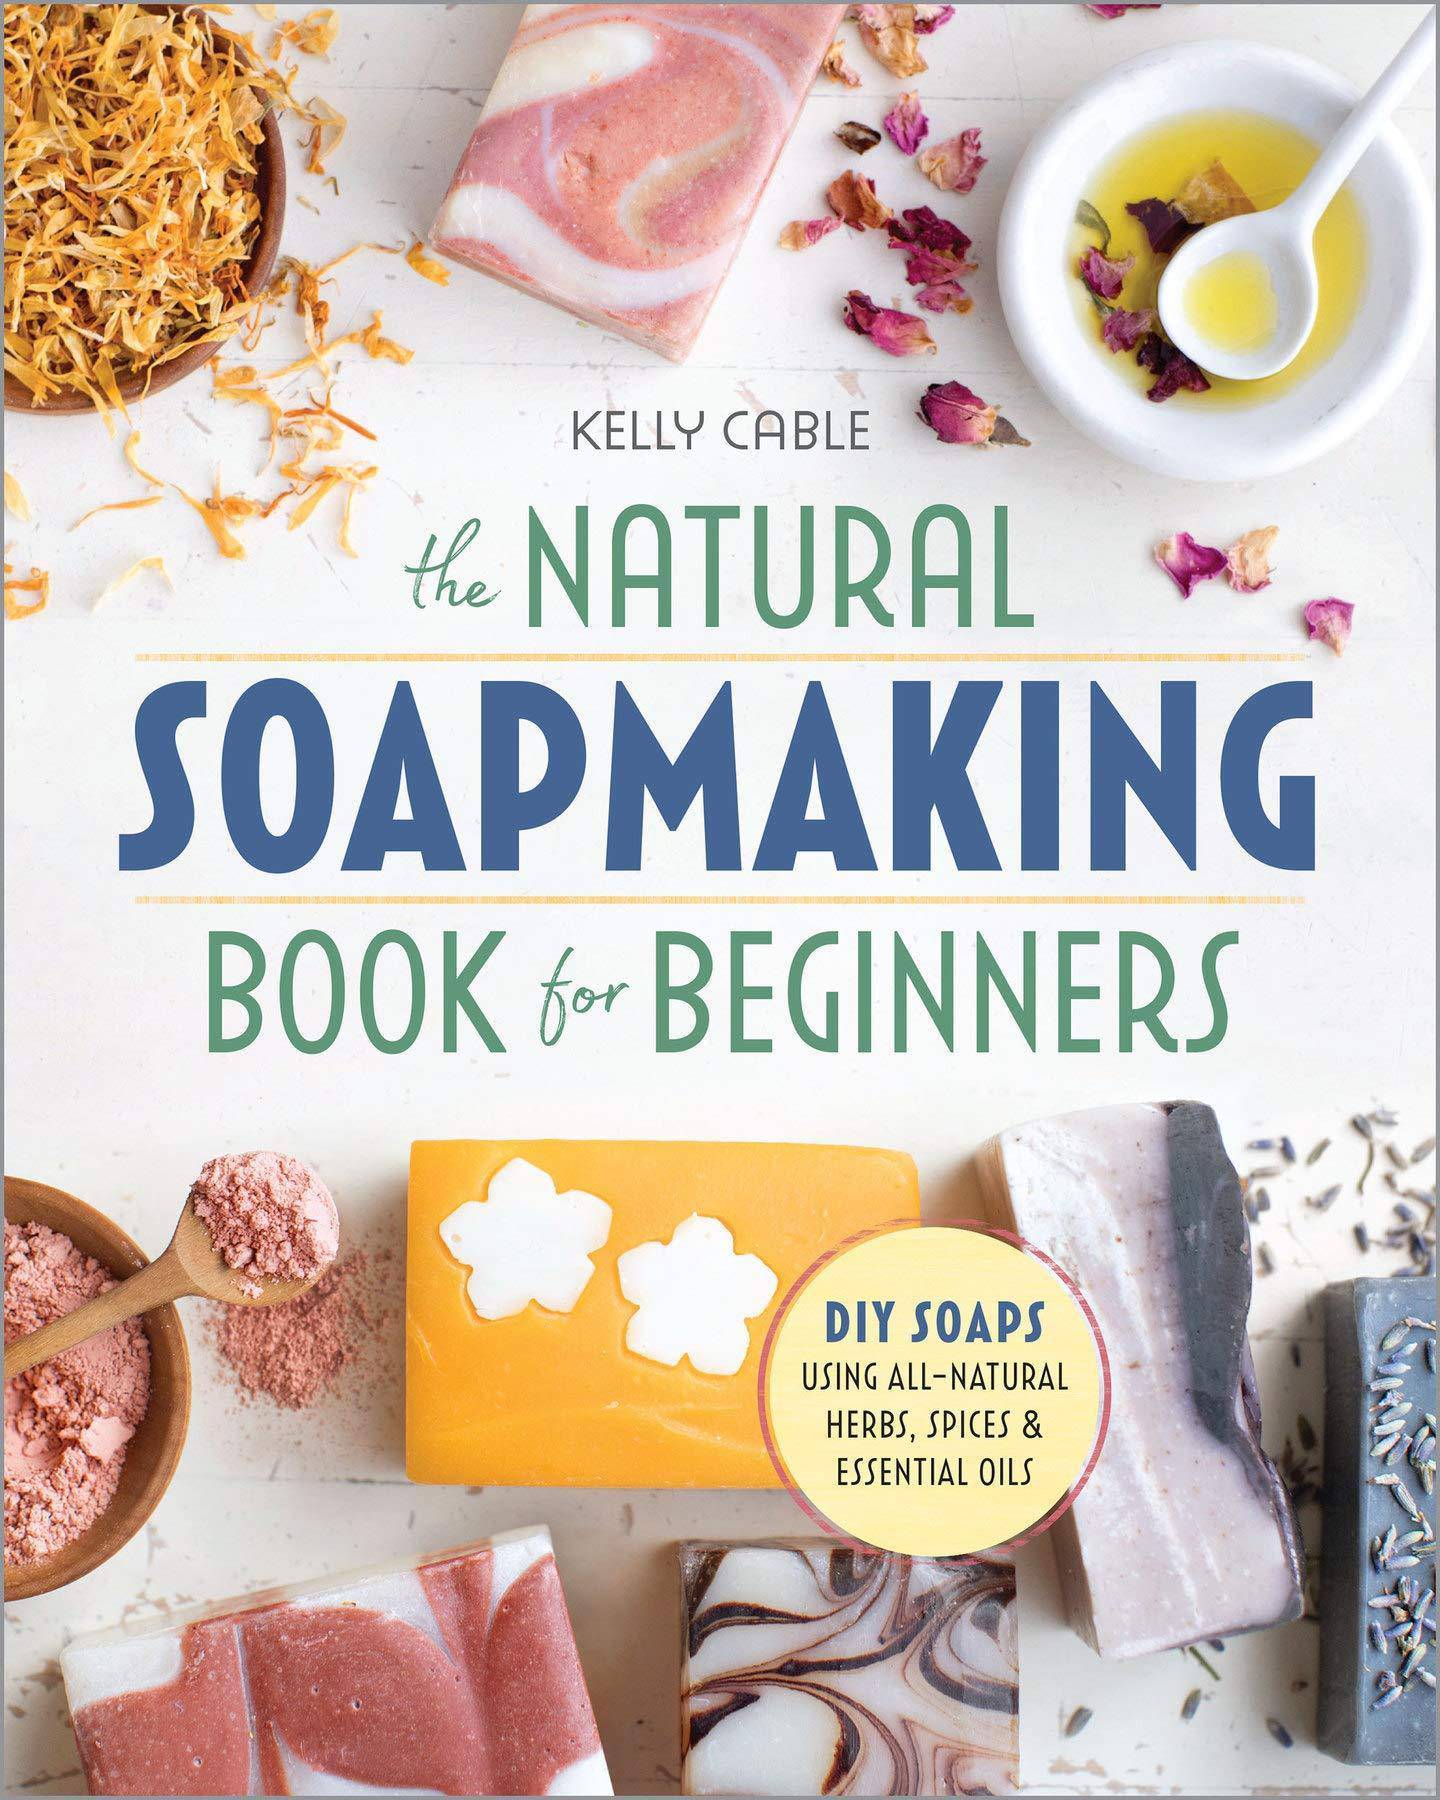 The Natural Soap Making Book for Beginners - SureShot Books Publishing LLC